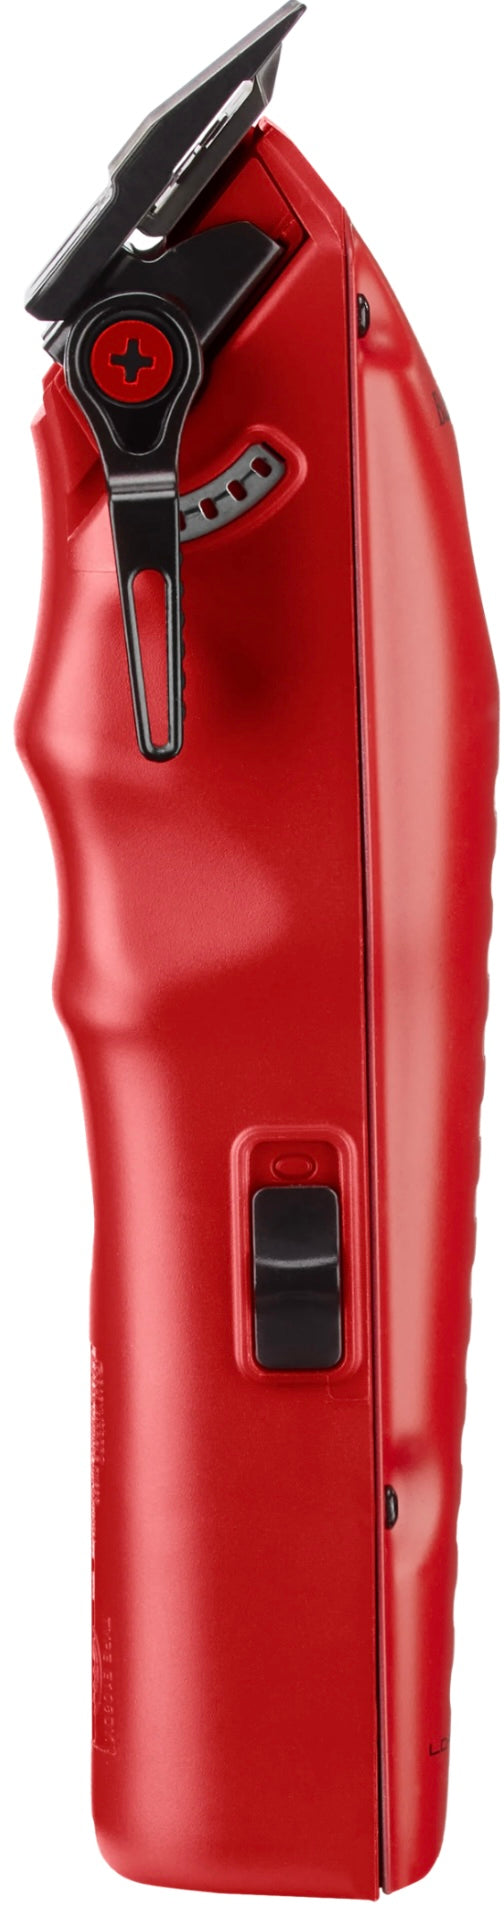 BABYLISS FXONE LO-PROFX LIMITED EDITION MATTE RED CLIPPER